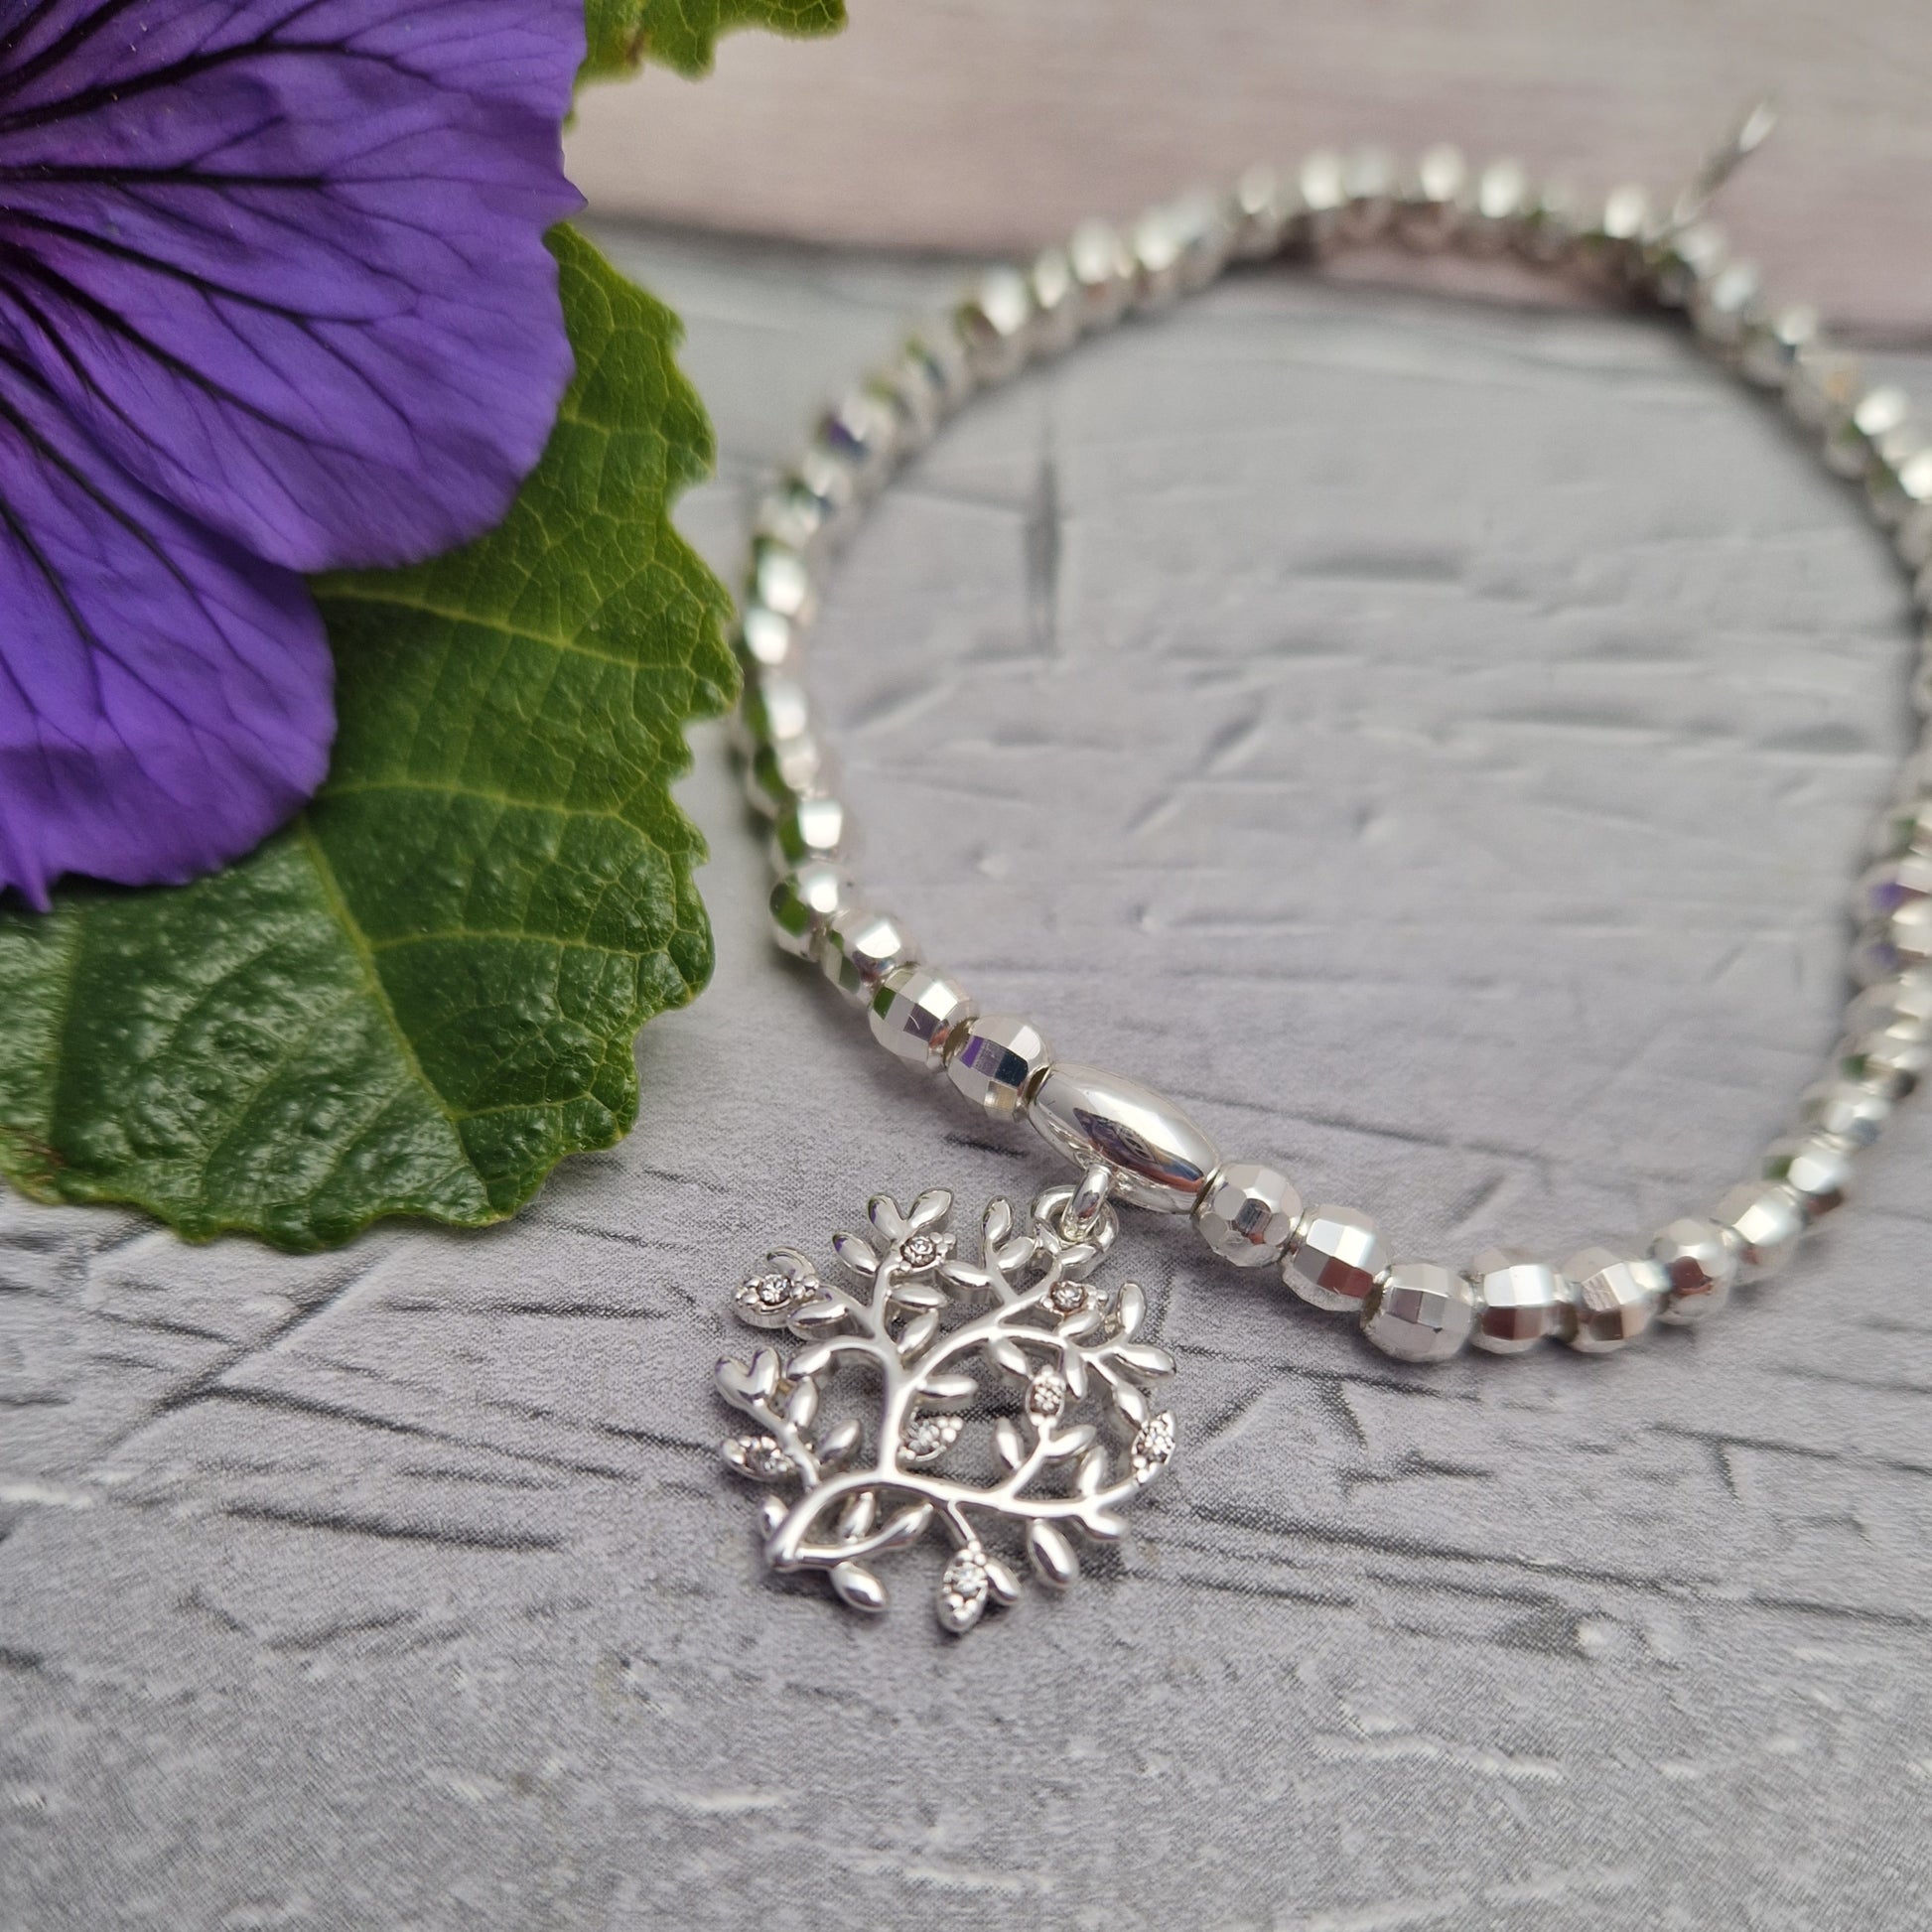 Silver beaded bracelet decorated with a Tree of Life Charm.